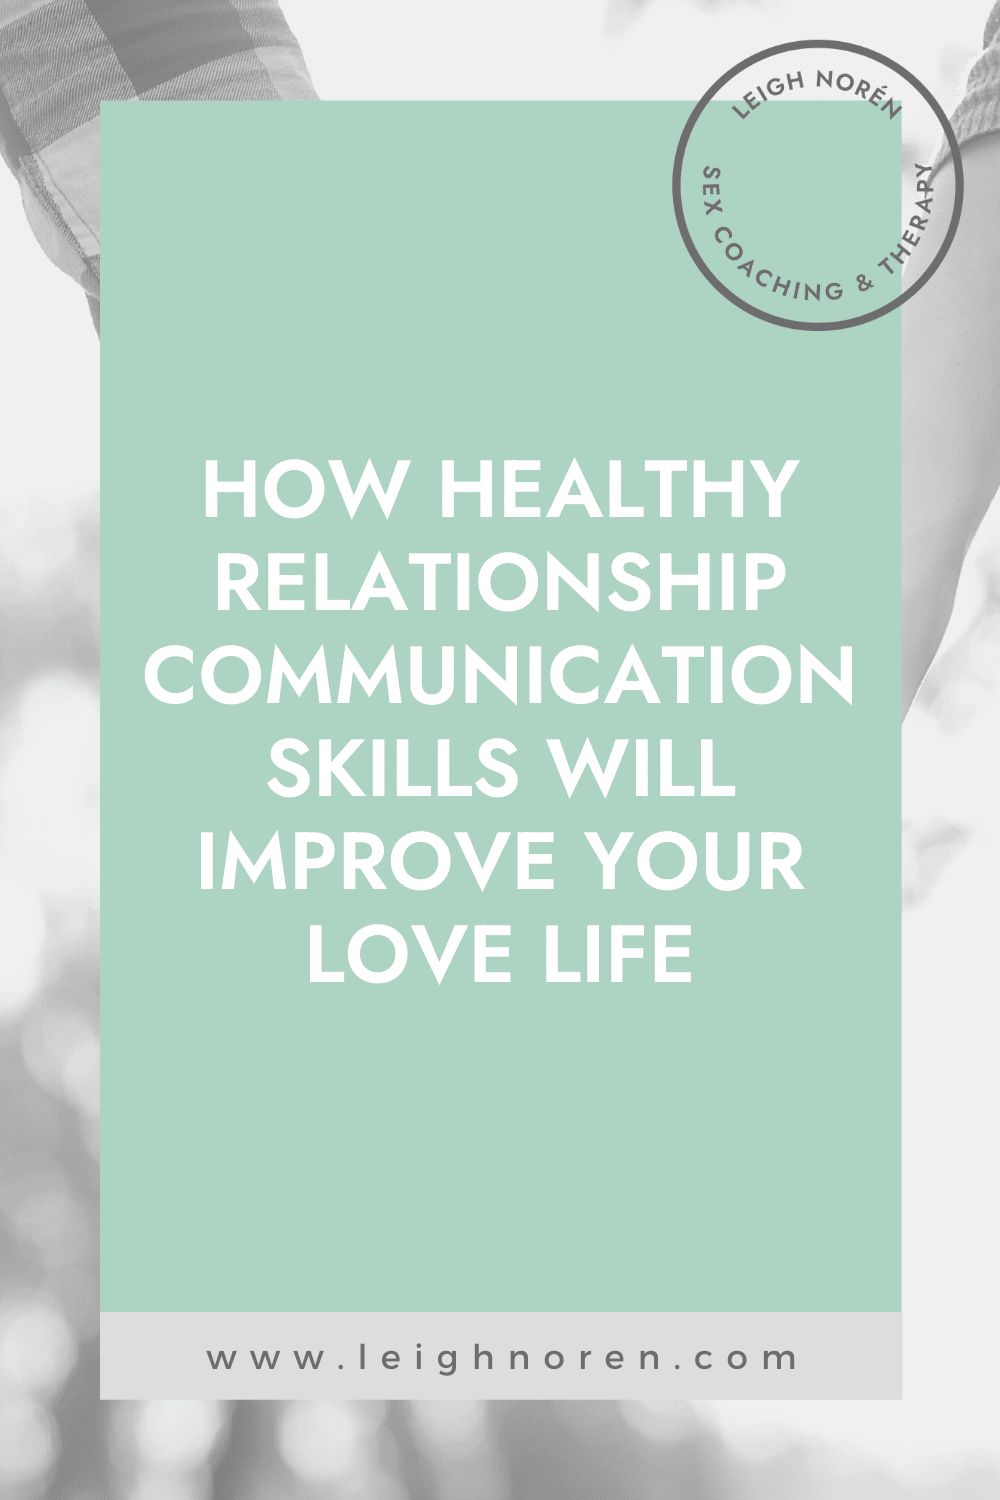 How Healthy Relationship Communication Skills Will Improve Your Love Life